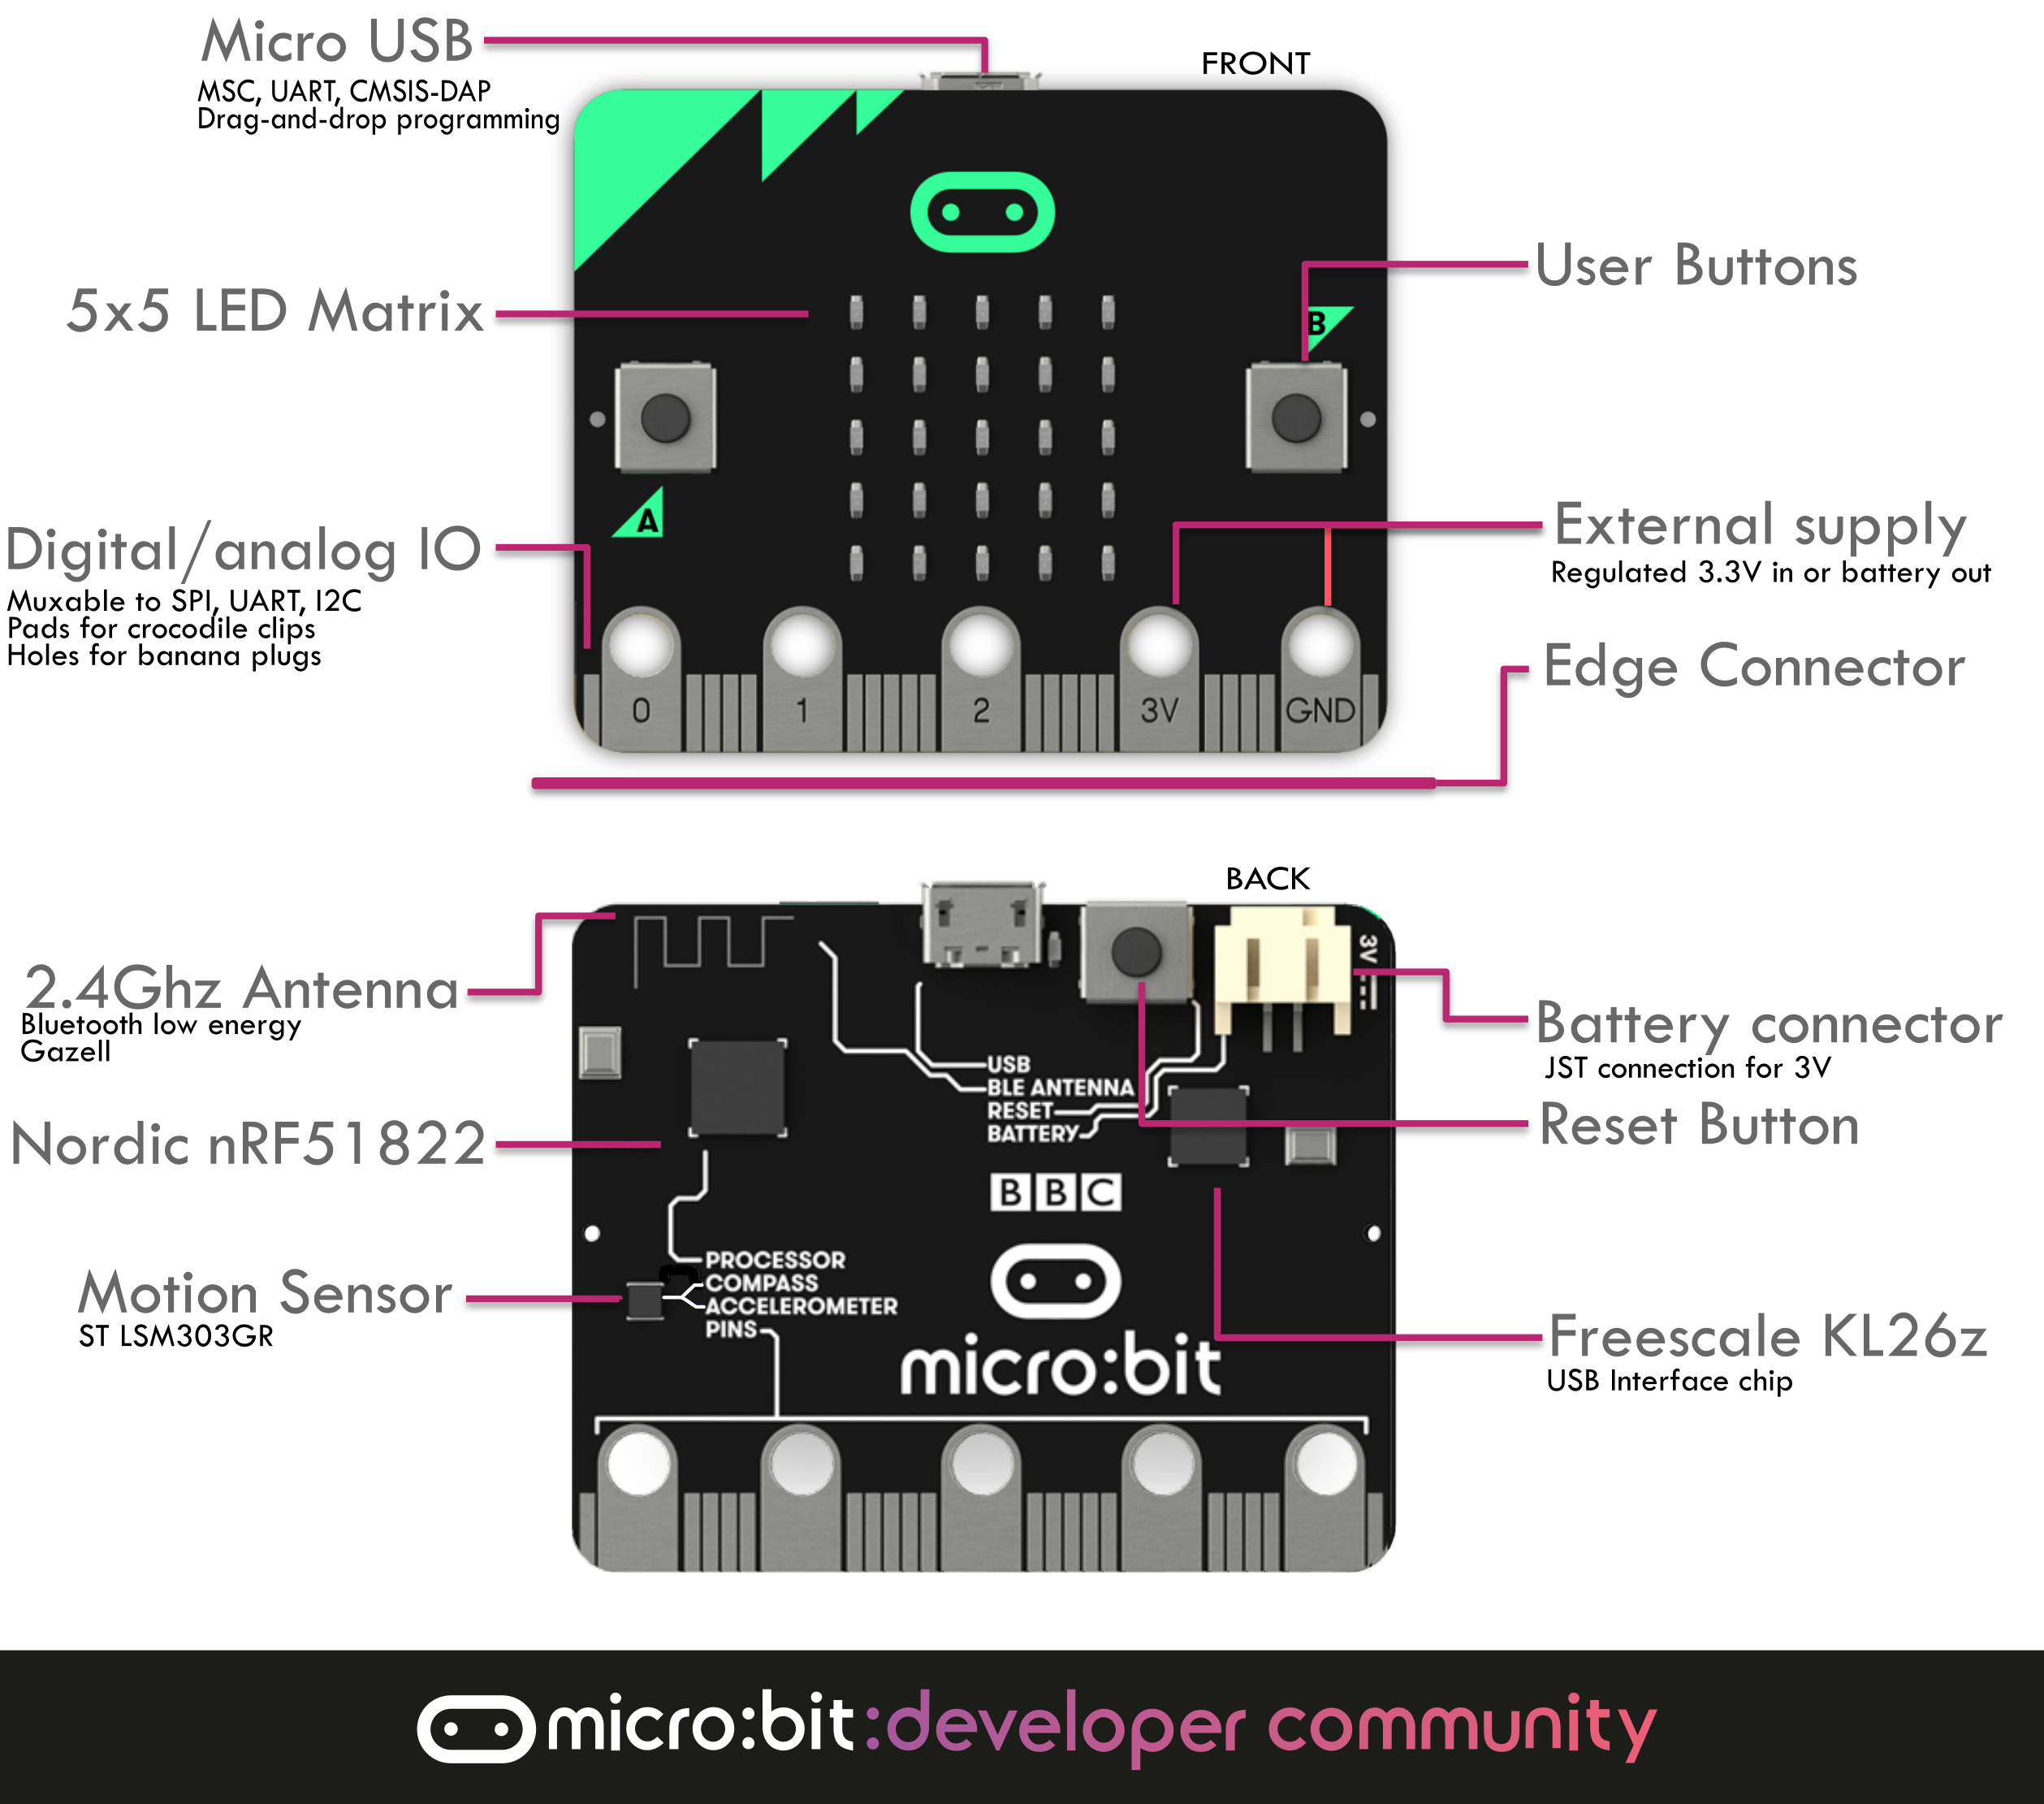 micro:bit specifications. Obtained from https://tech.microbit.org/hardware/